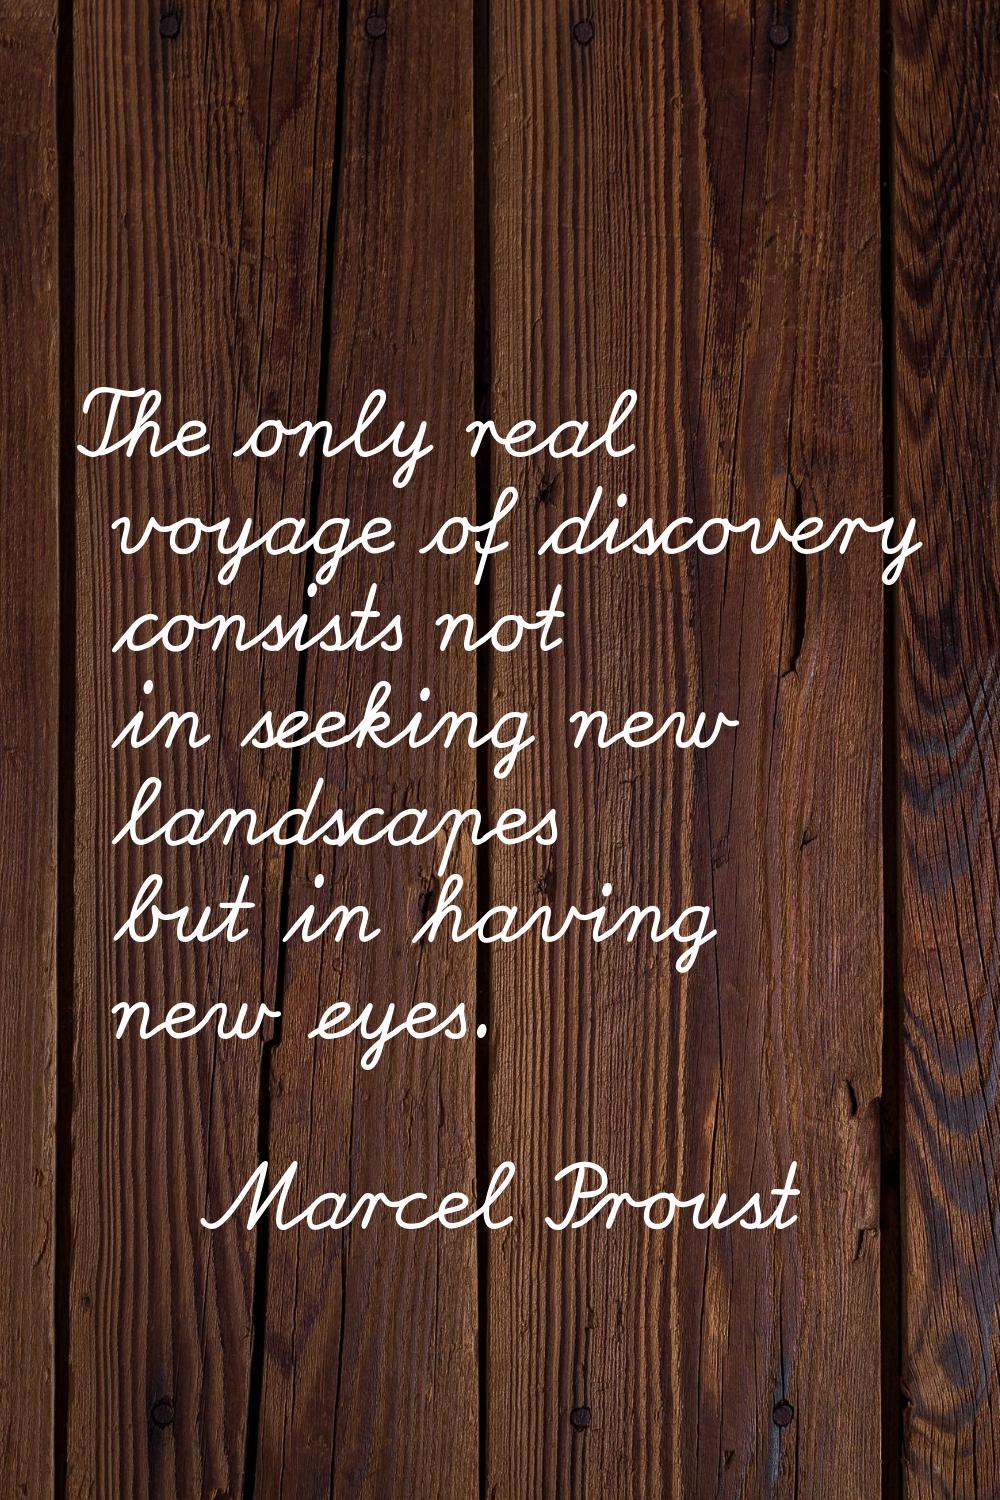 The only real voyage of discovery consists not in seeking new landscapes but in having new eyes.